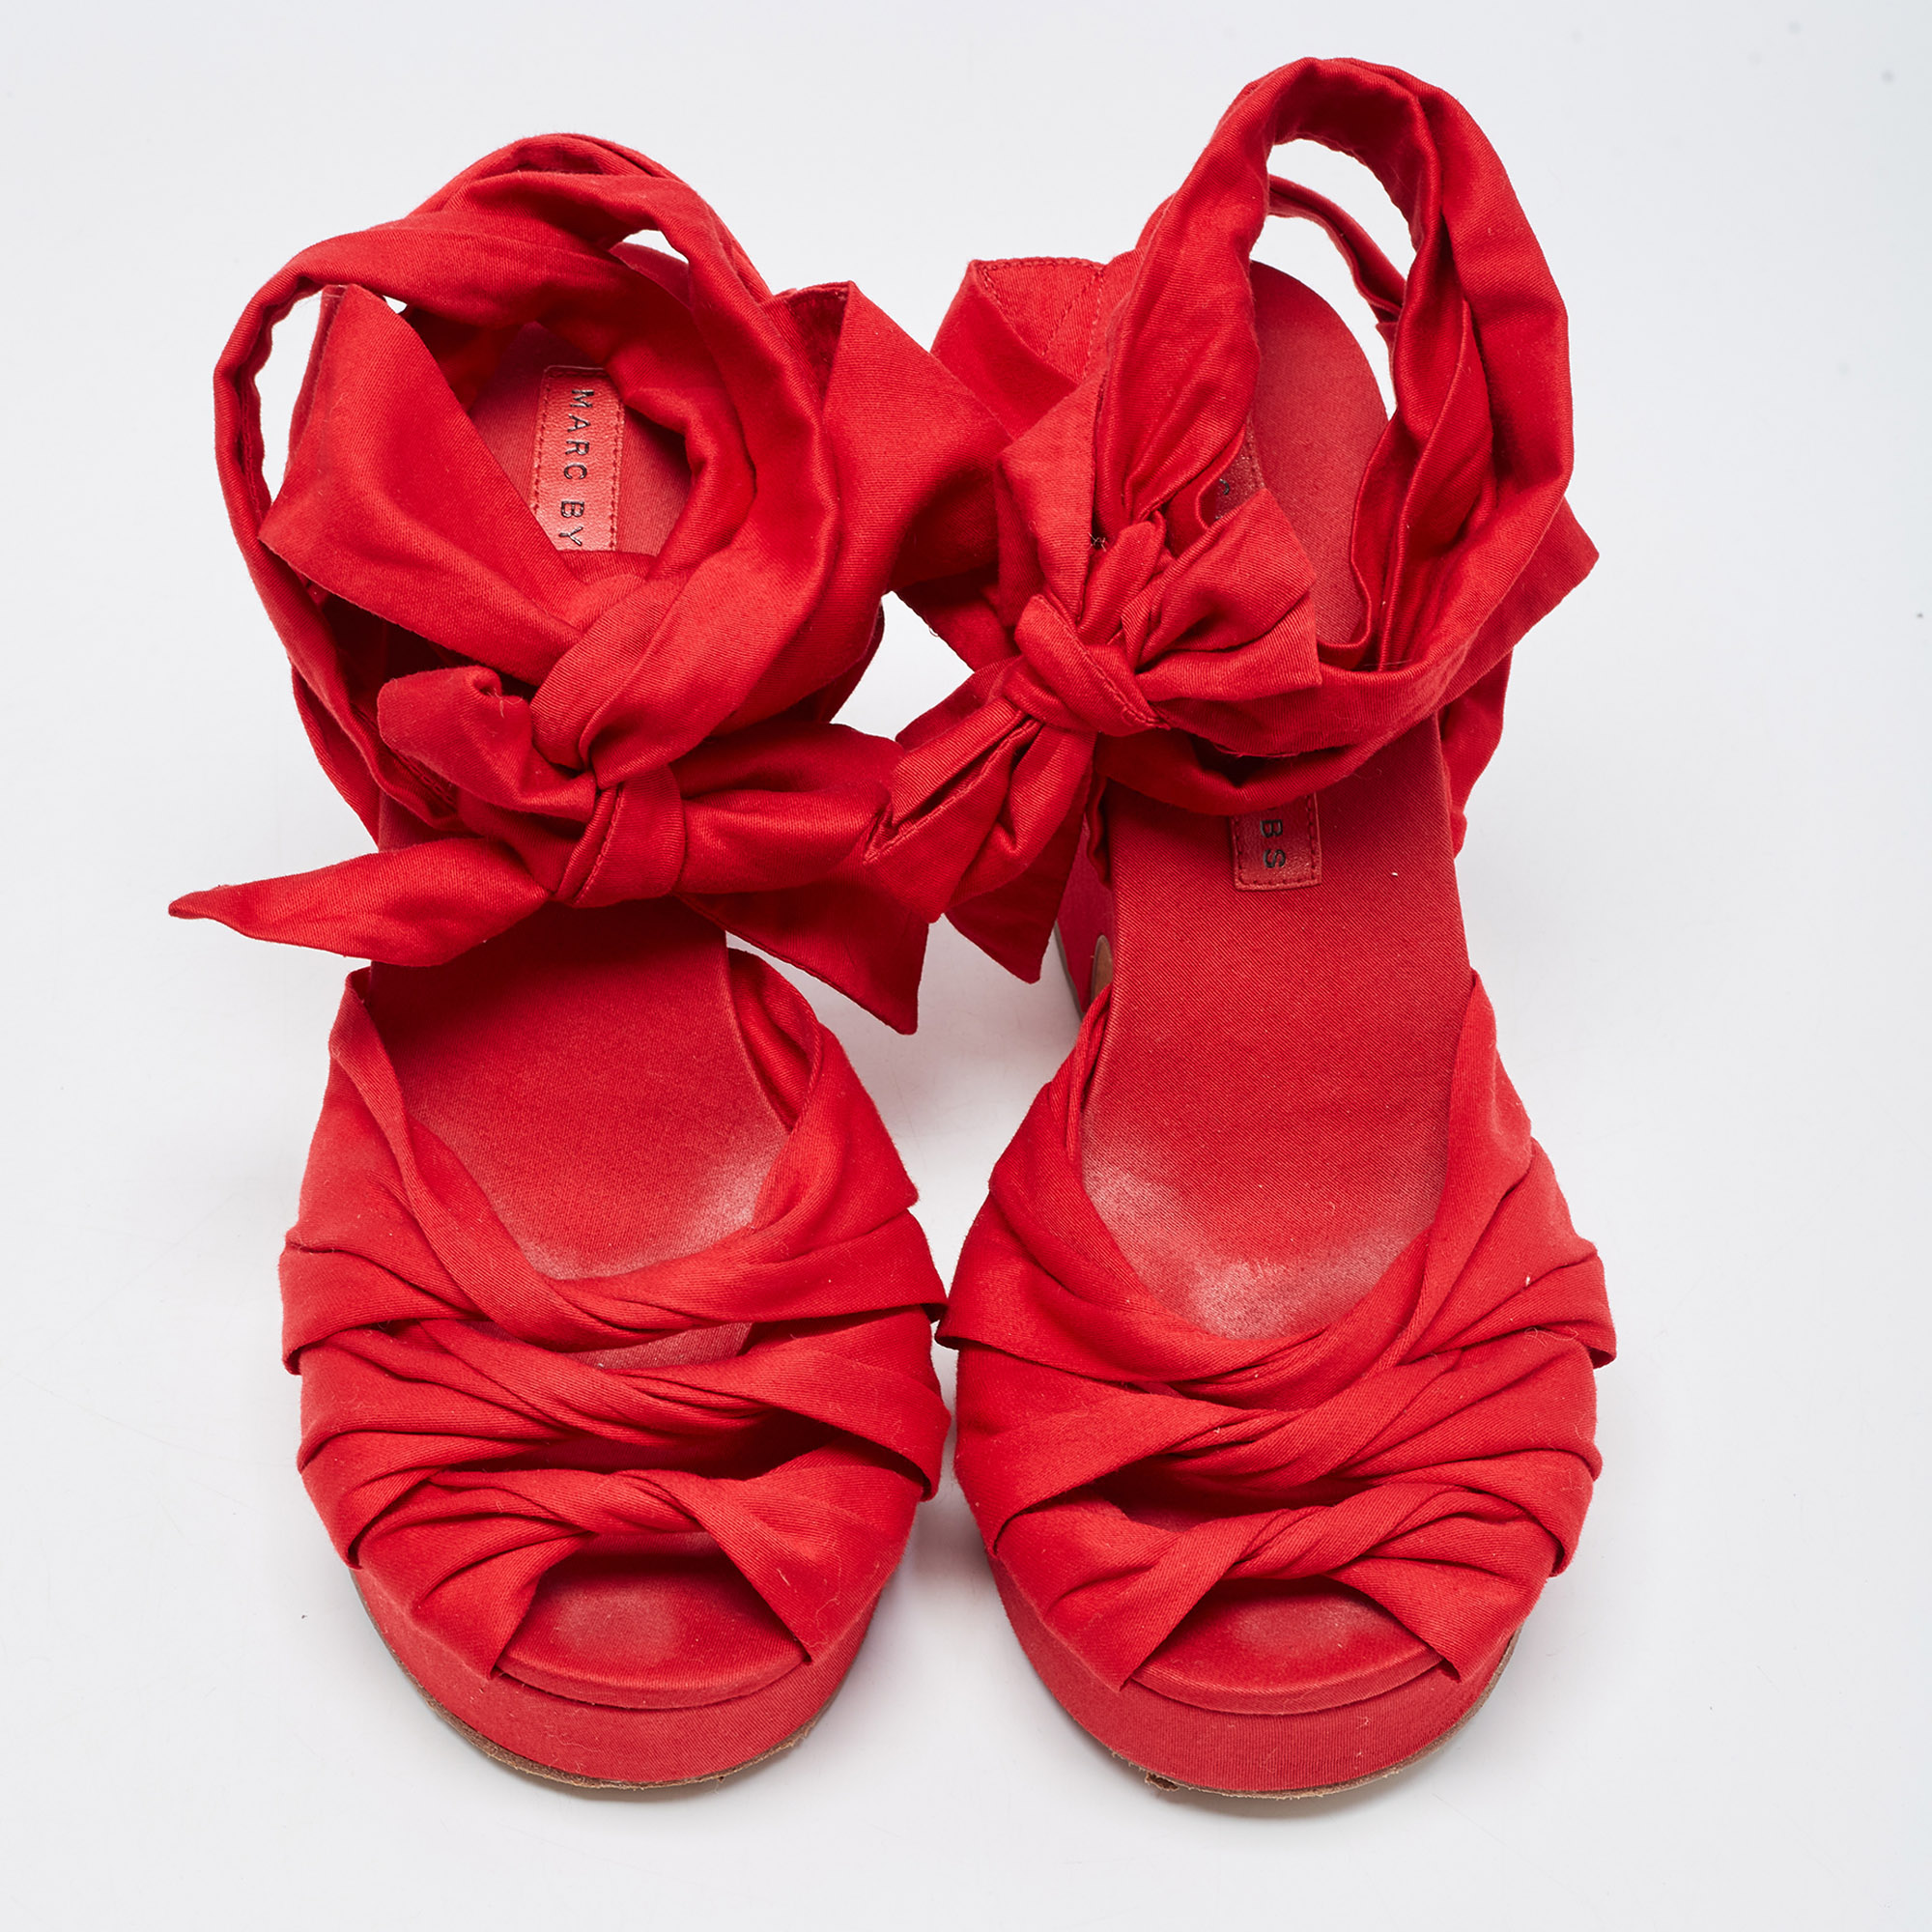 Marc By Marc Jacobs Red Fabric Tie Up Block Heel Sandals Size 38.5